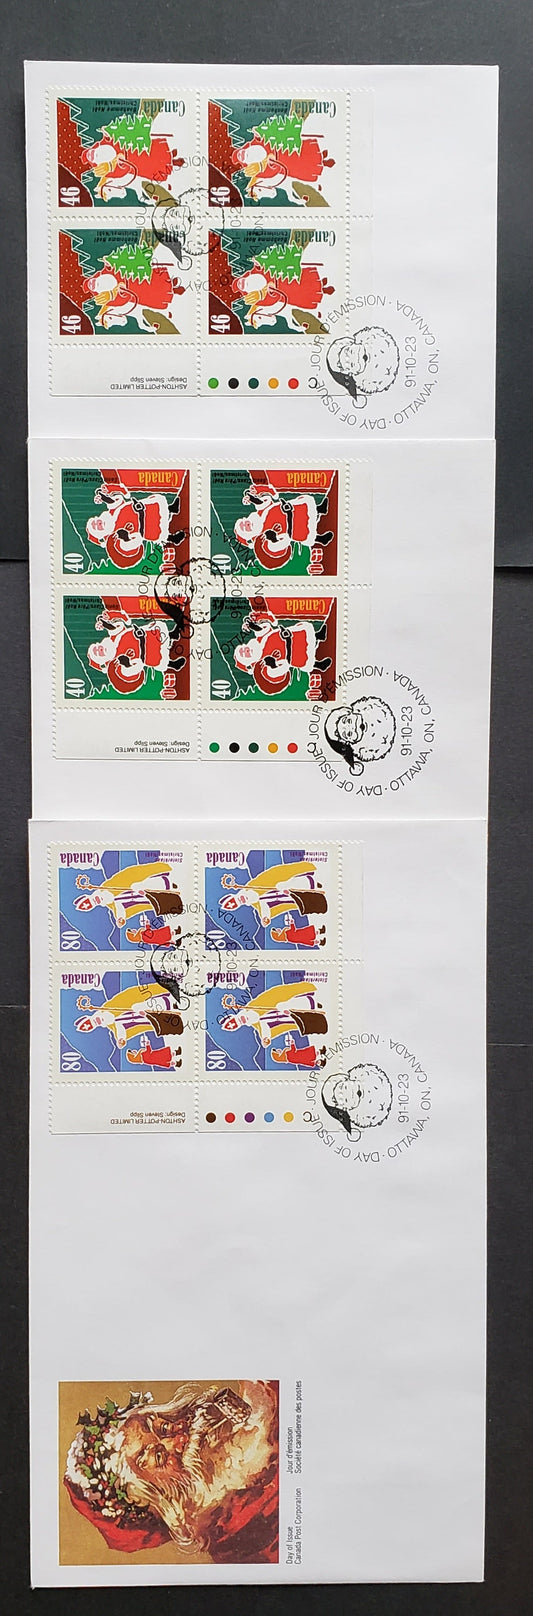 Lot 97 Canada #1339-1341 40c-80c Multicolor 1991 Christmas Issue, 3 Canada Post FDC's Franked With LL Inscription Blocks, Approx 22,000 Of Each Produced, Cat. Value $12.9